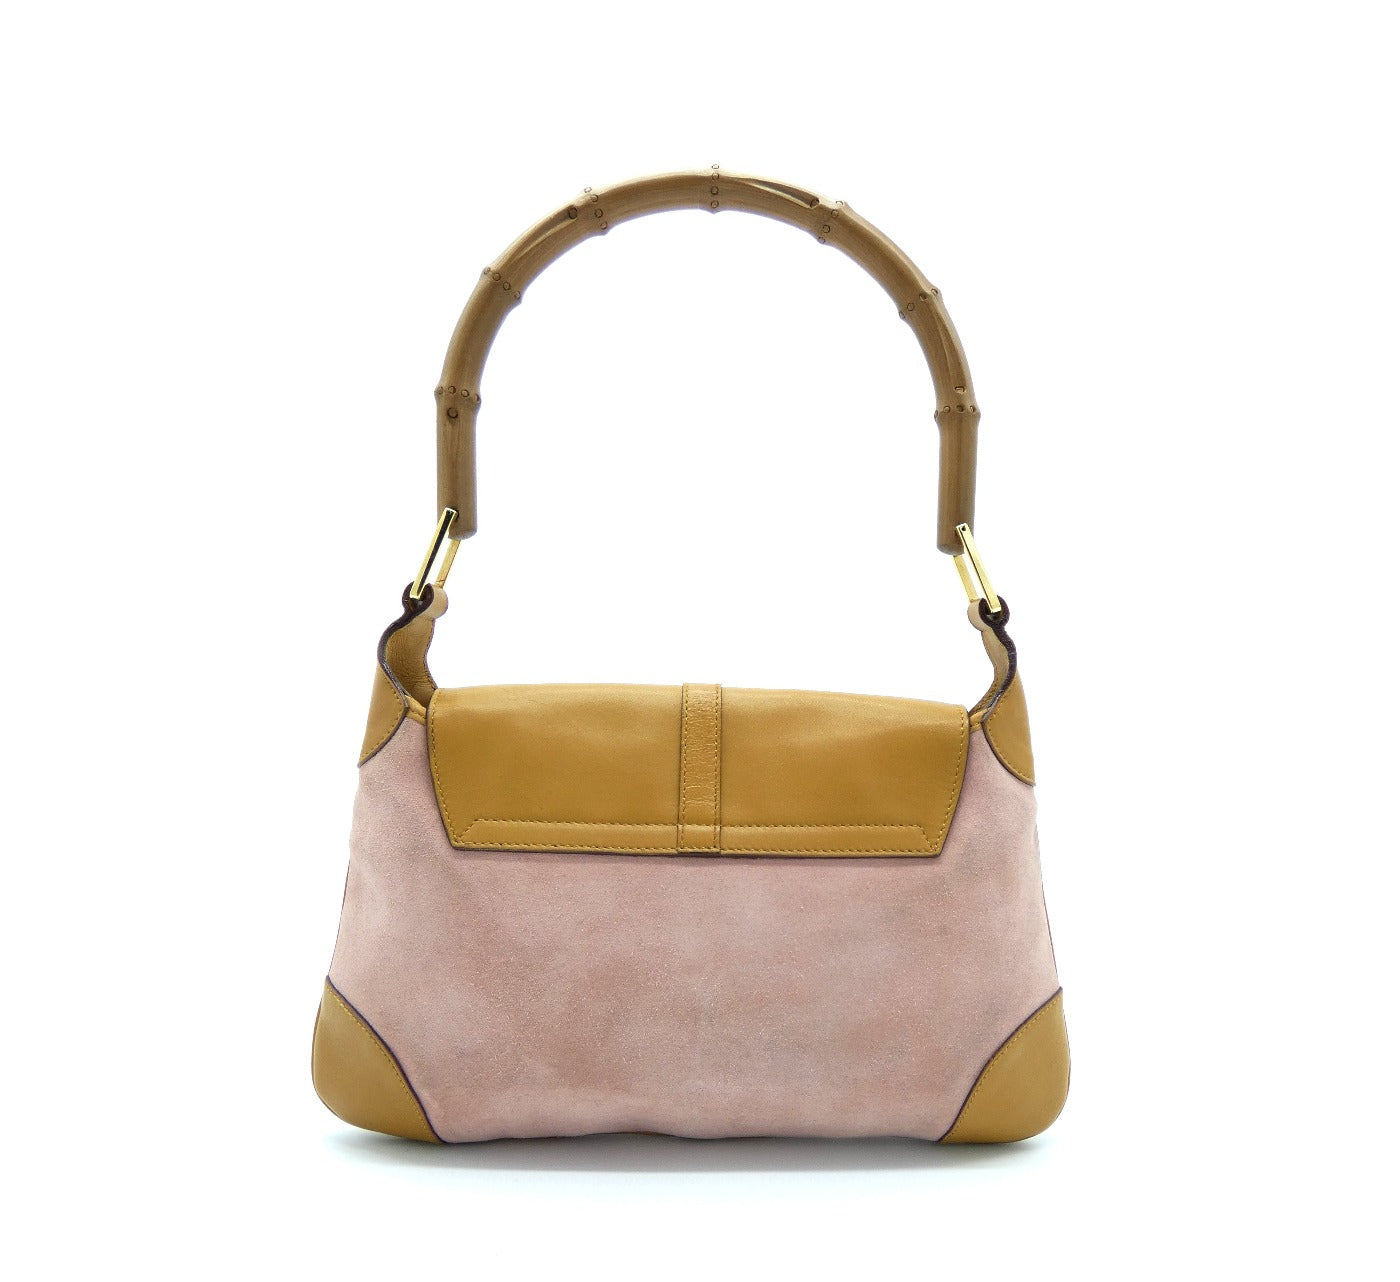 Gucci Jackie Bag in Light Yellow / Beige Leather 